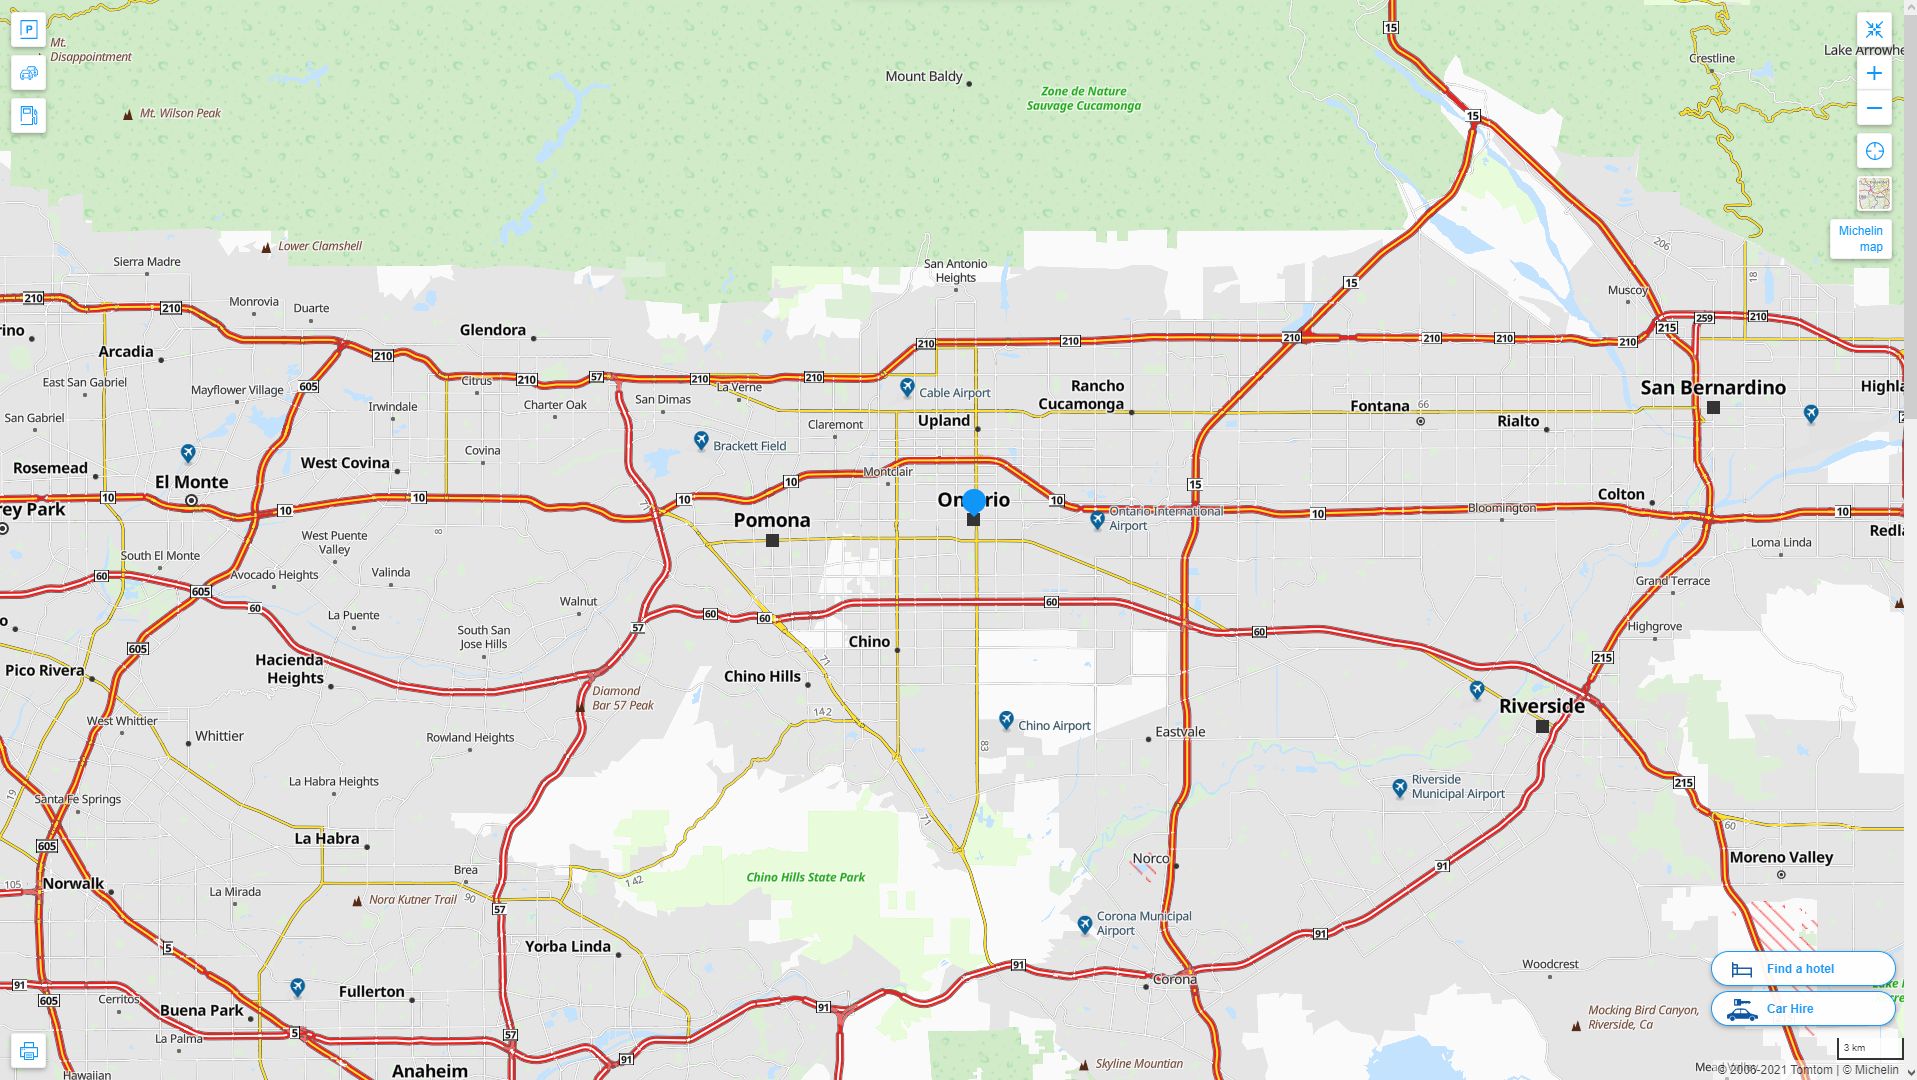 Ontario California Highway and Road Map